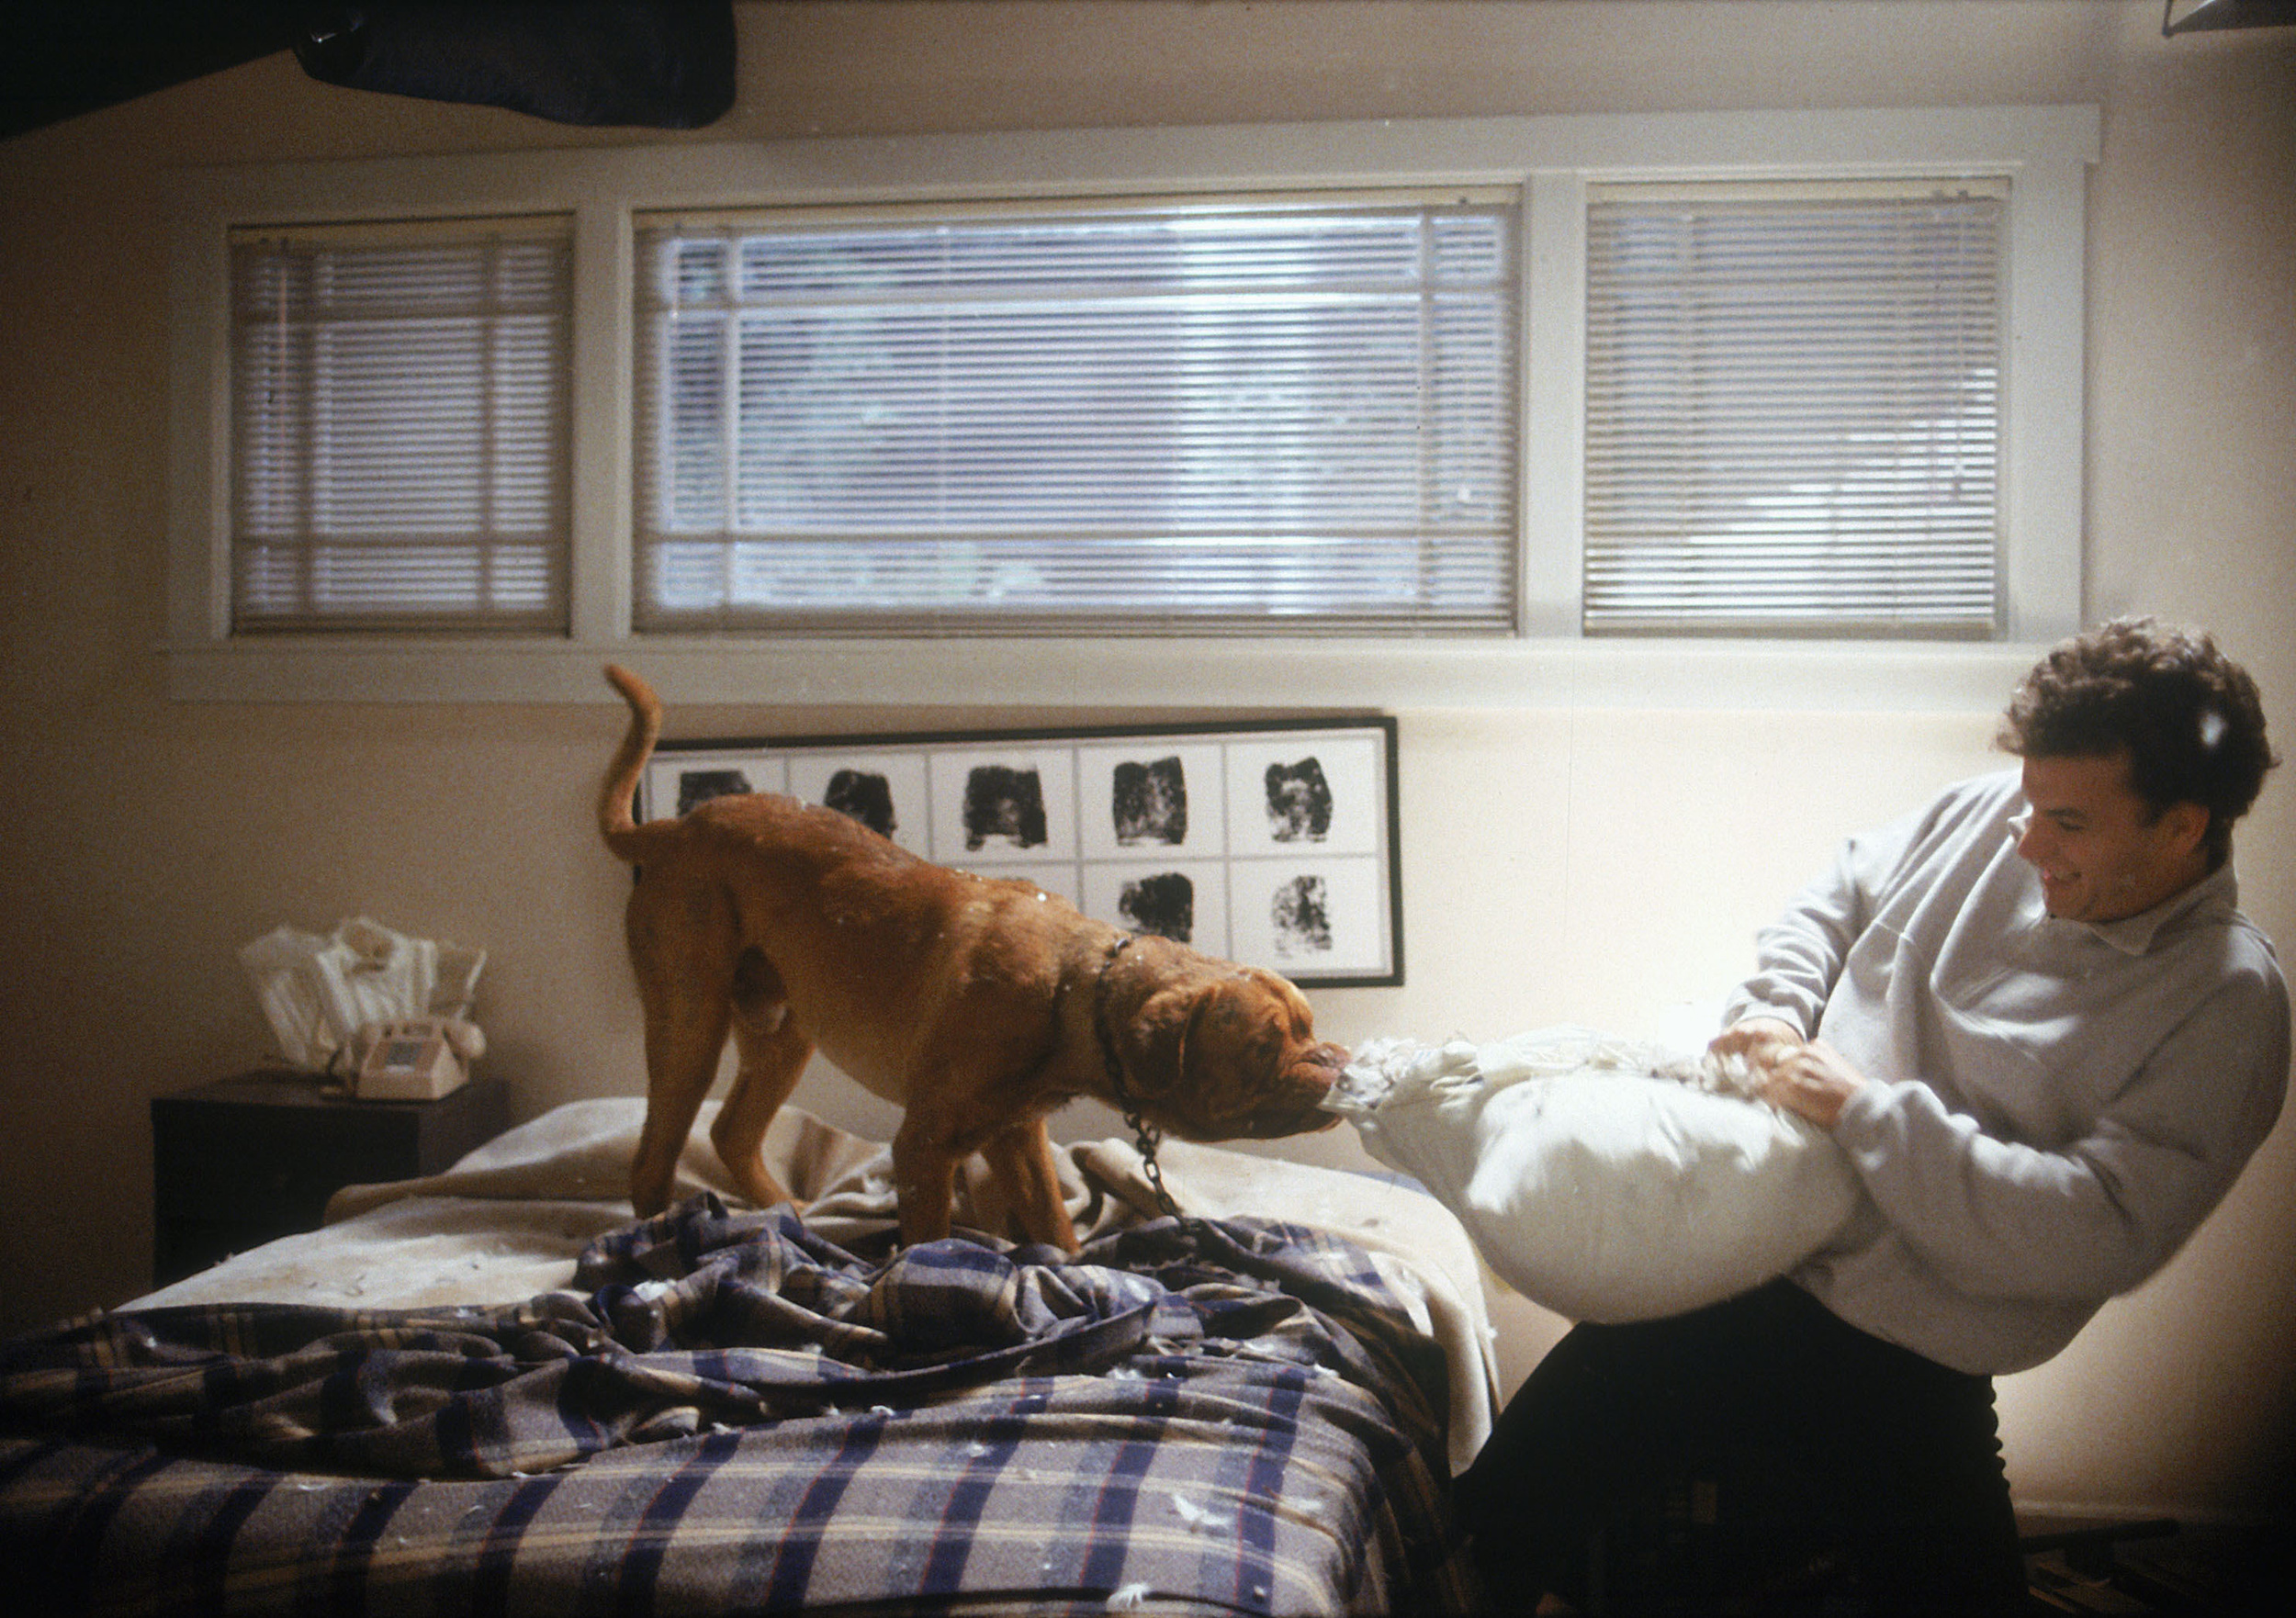 <p>Grodin did great work with a dog, and so did Tom Hanks. Early in his career, before he was an Oscars darling, Hanks played a cop who is paired with a dog on a case. It’s a mismatched buddy cop film at its core, but one of them is a canine. Hanks has to shoulder the load, but he has no problem with it, of course. He even nails the dramatic moments.</p><p>You may also like: <a href='https://www.yardbarker.com/entertainment/articles/teen_movie_leads_thatd_be_the_best_and_worst_prom_dates_092723/s1__38644920'>Teen movie leads that’d be the best and worst prom dates</a></p>